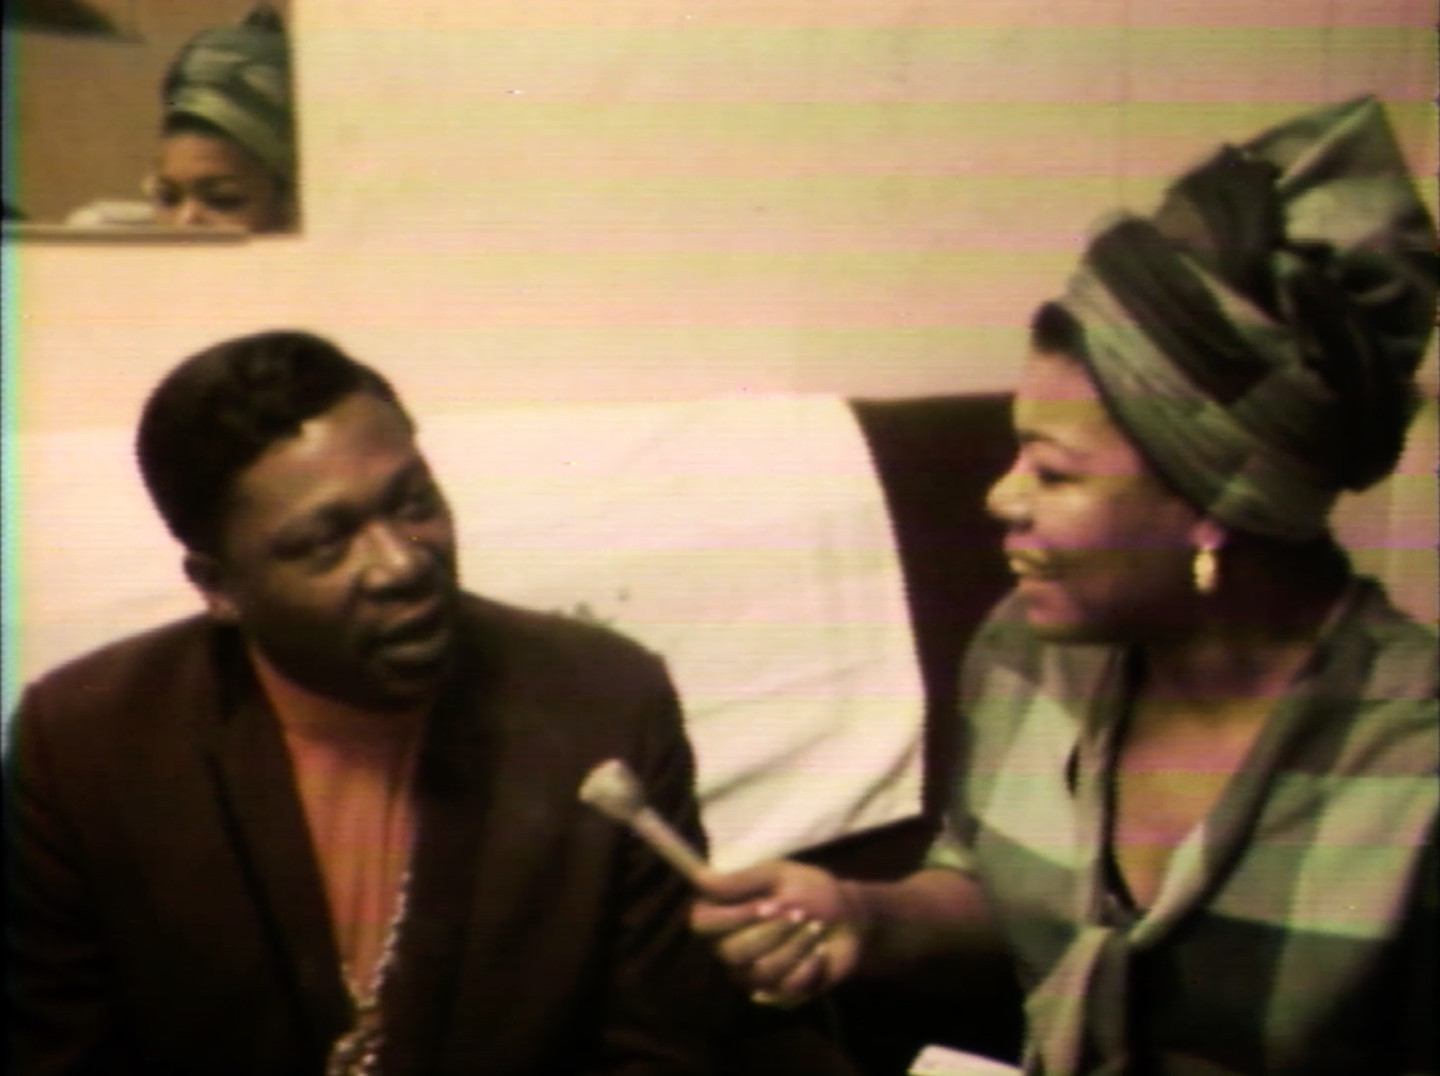 Maya Angelou interviewing B.B. King in an episode about music from "Blacks, Blues, Black!"